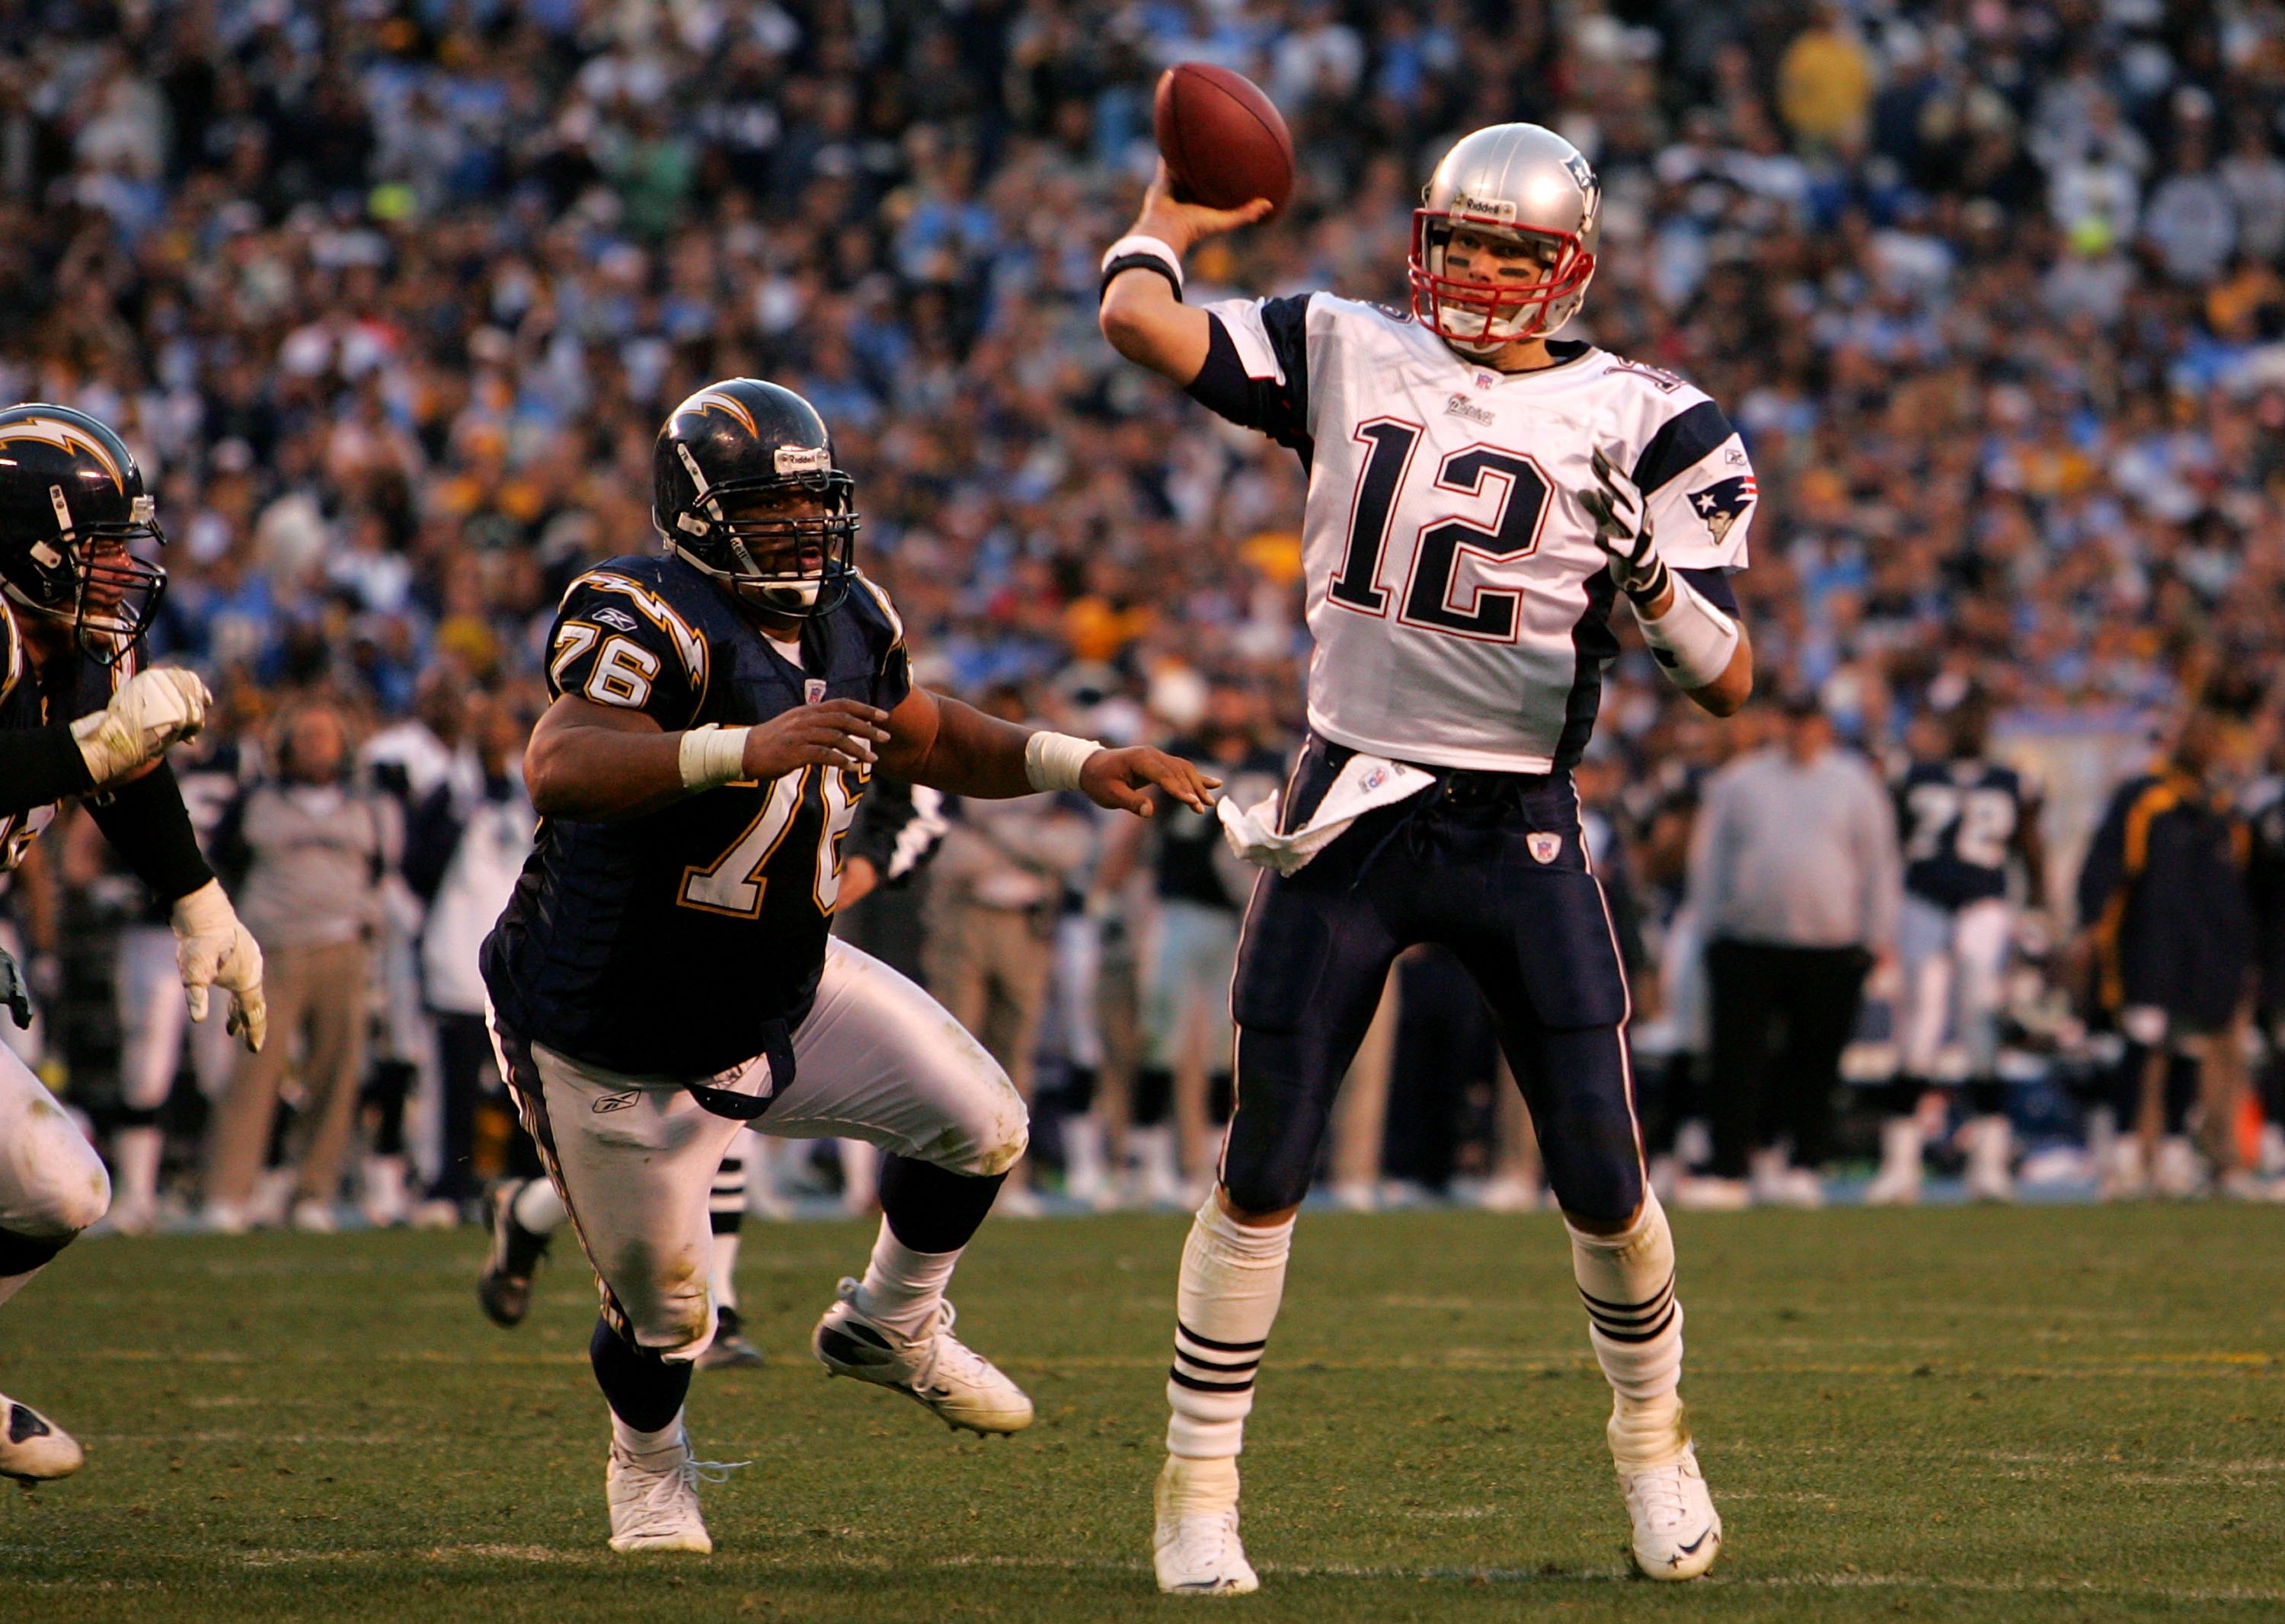 Tom Brady of the New England Patriots throws a 4 yard touchdown pass during the fourth quarter of the AFC Divisional Playoff Game held at Qualcomm Stadium January 14, 2007 in San Diego, California. The Patriots defeated the Chargers 24-21. (Photo by Stephen Dunn/Getty Images)